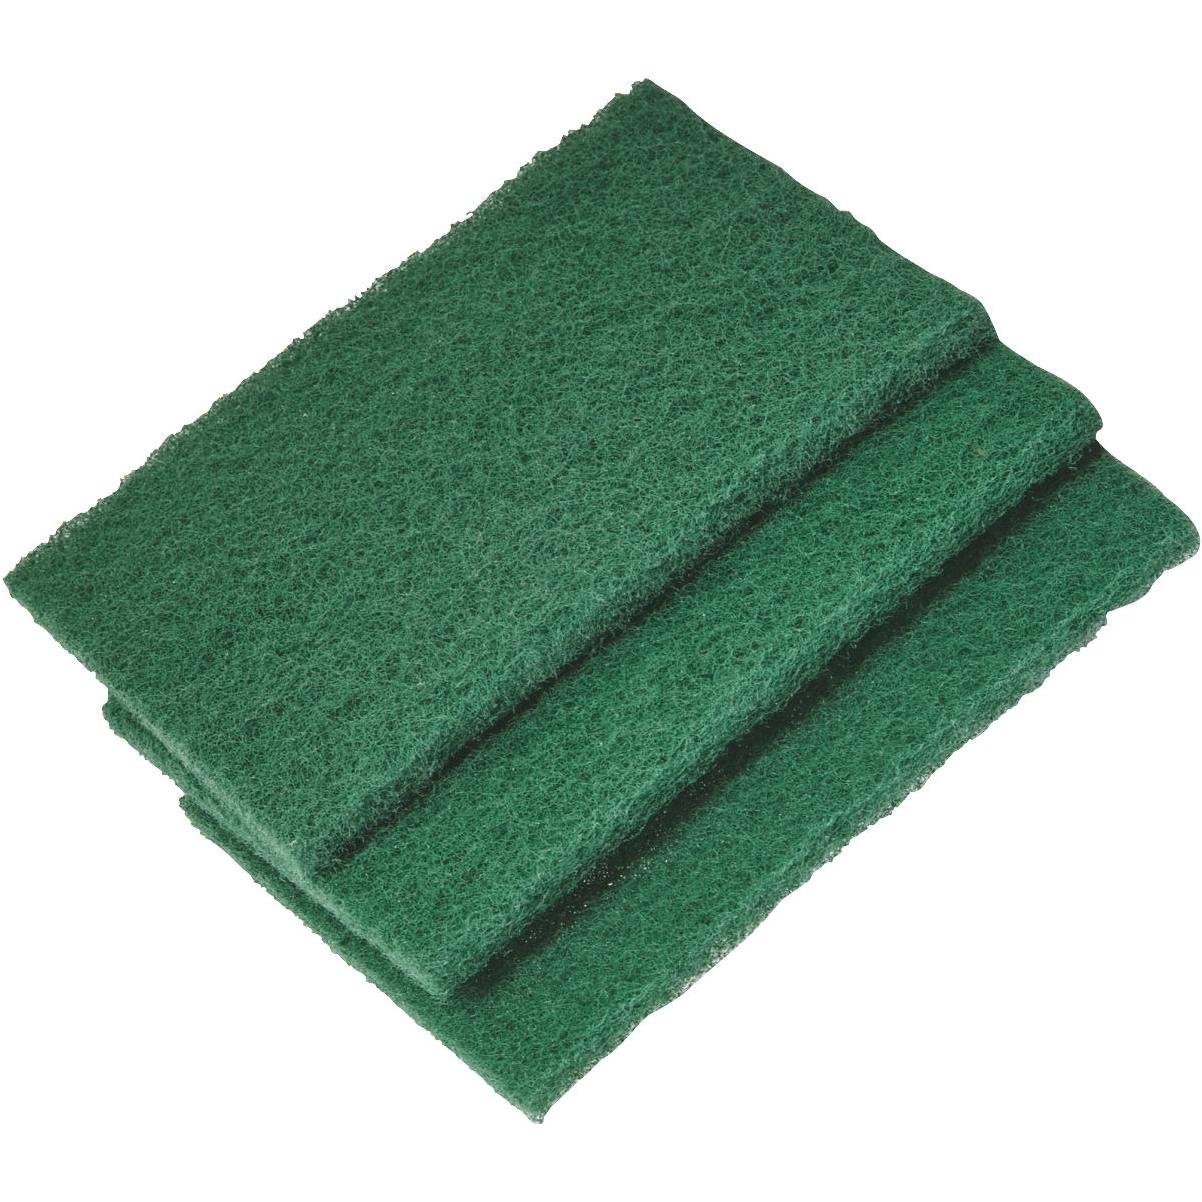 Libman Heavy-Duty Easy-Rinse Cleaning Sponges (6-Count), Green